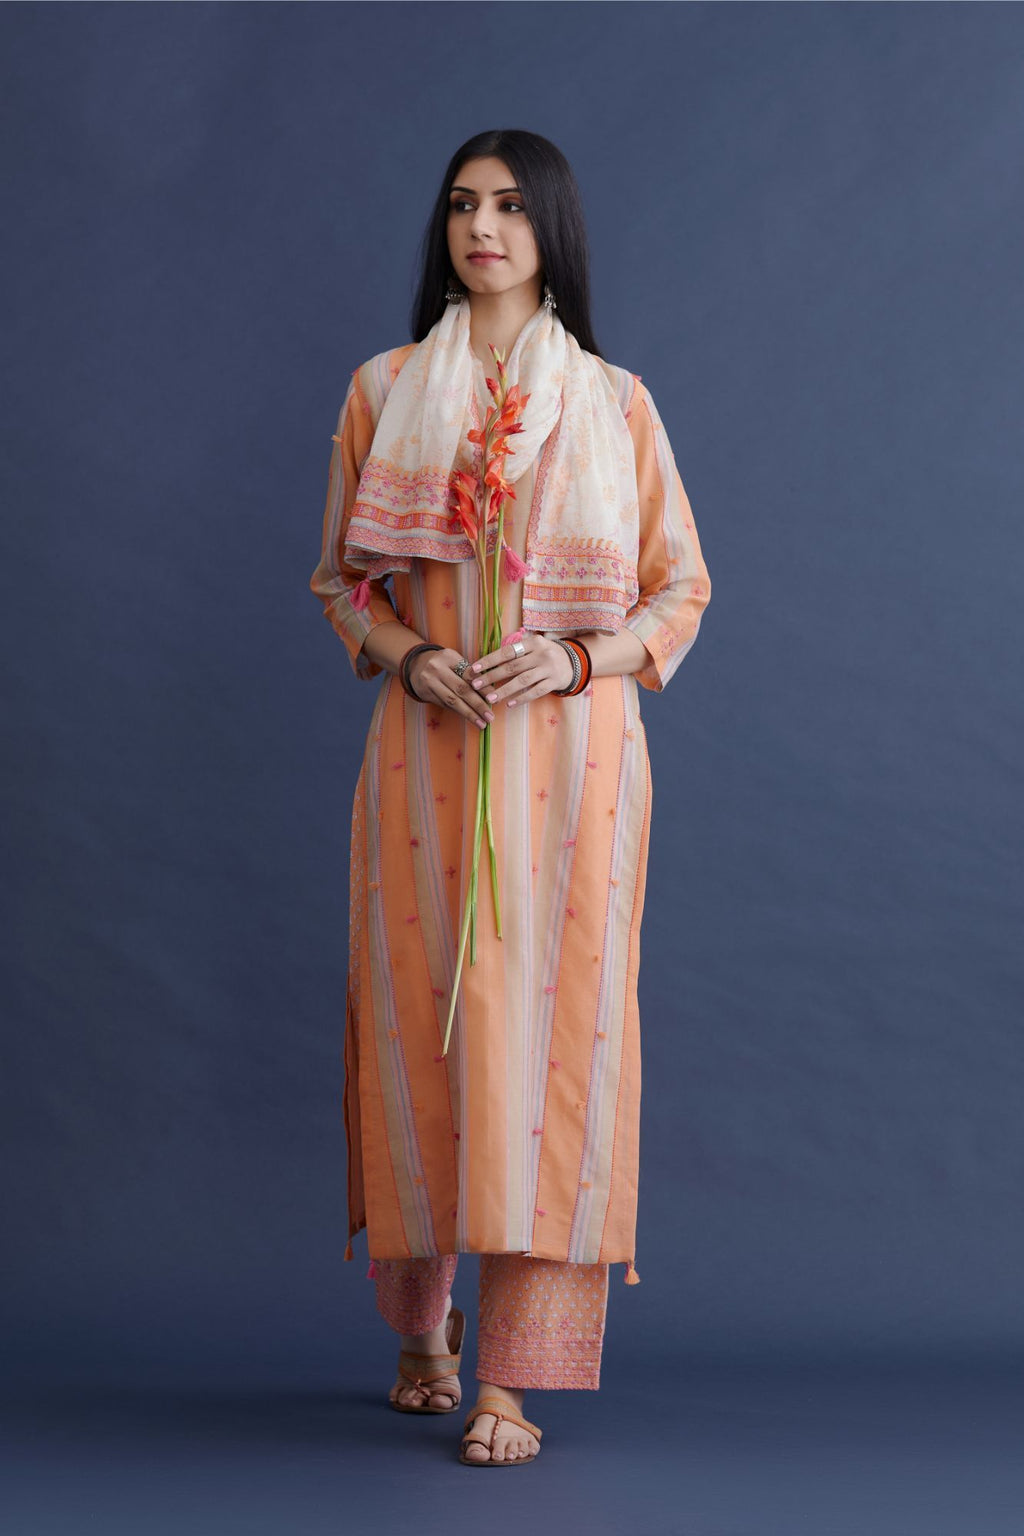 Off white cotton Chanderi narrow stole with all over pink and orange hand block print, highlighted with beads and thread embroidery at sides